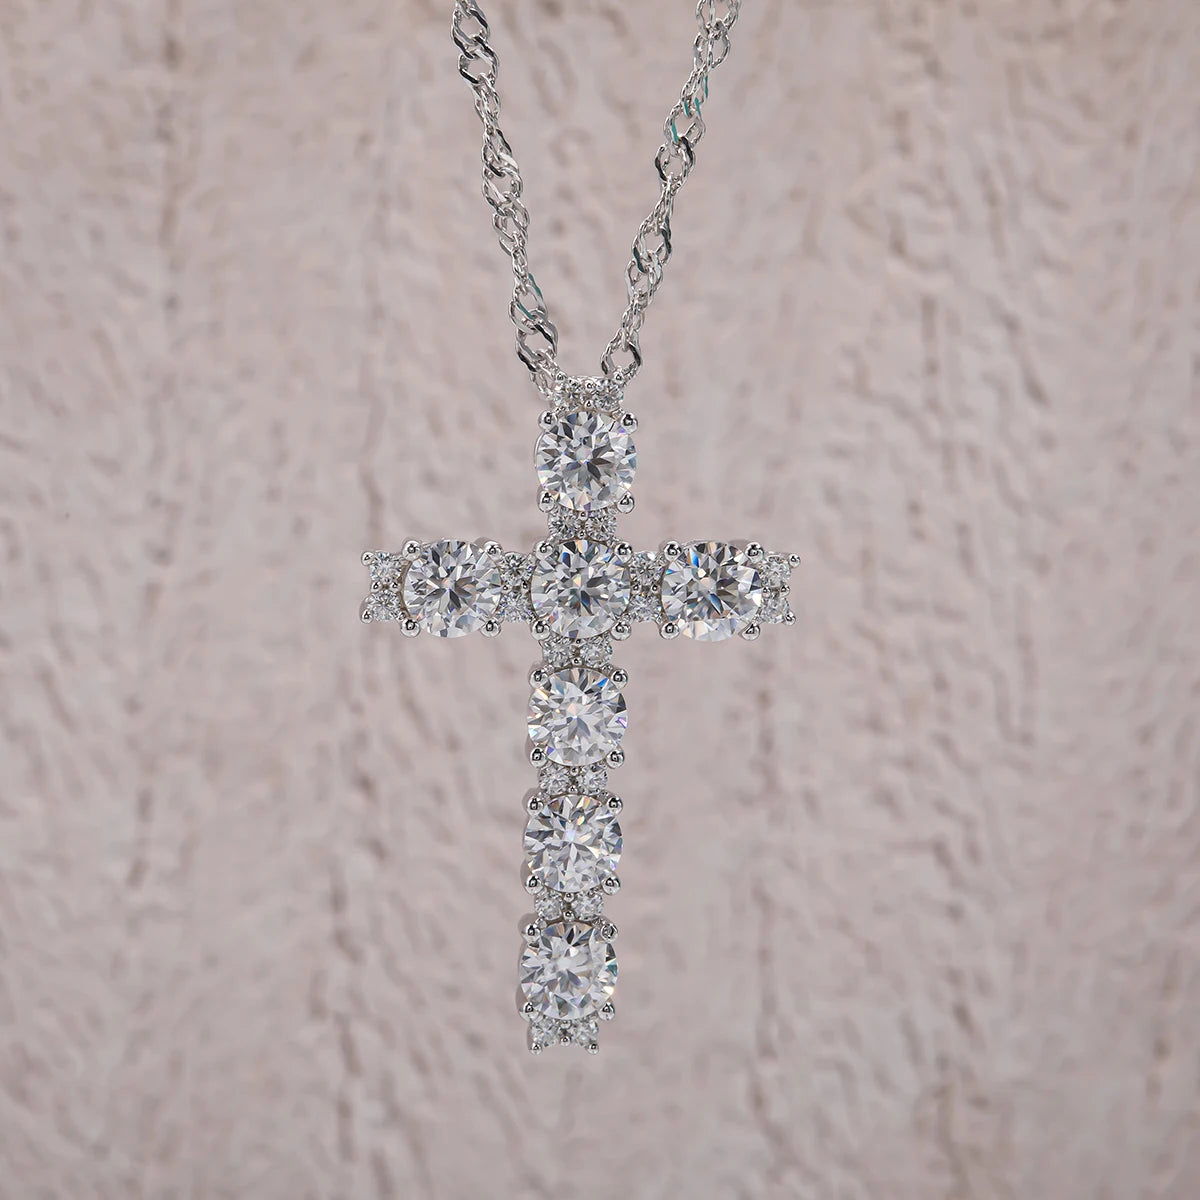 4MM 2.1 Carat D Color Moissanite Diamond Cross Pendant Necklace 925 Sterling Silver 18K Gold Plated Customs Jewelry